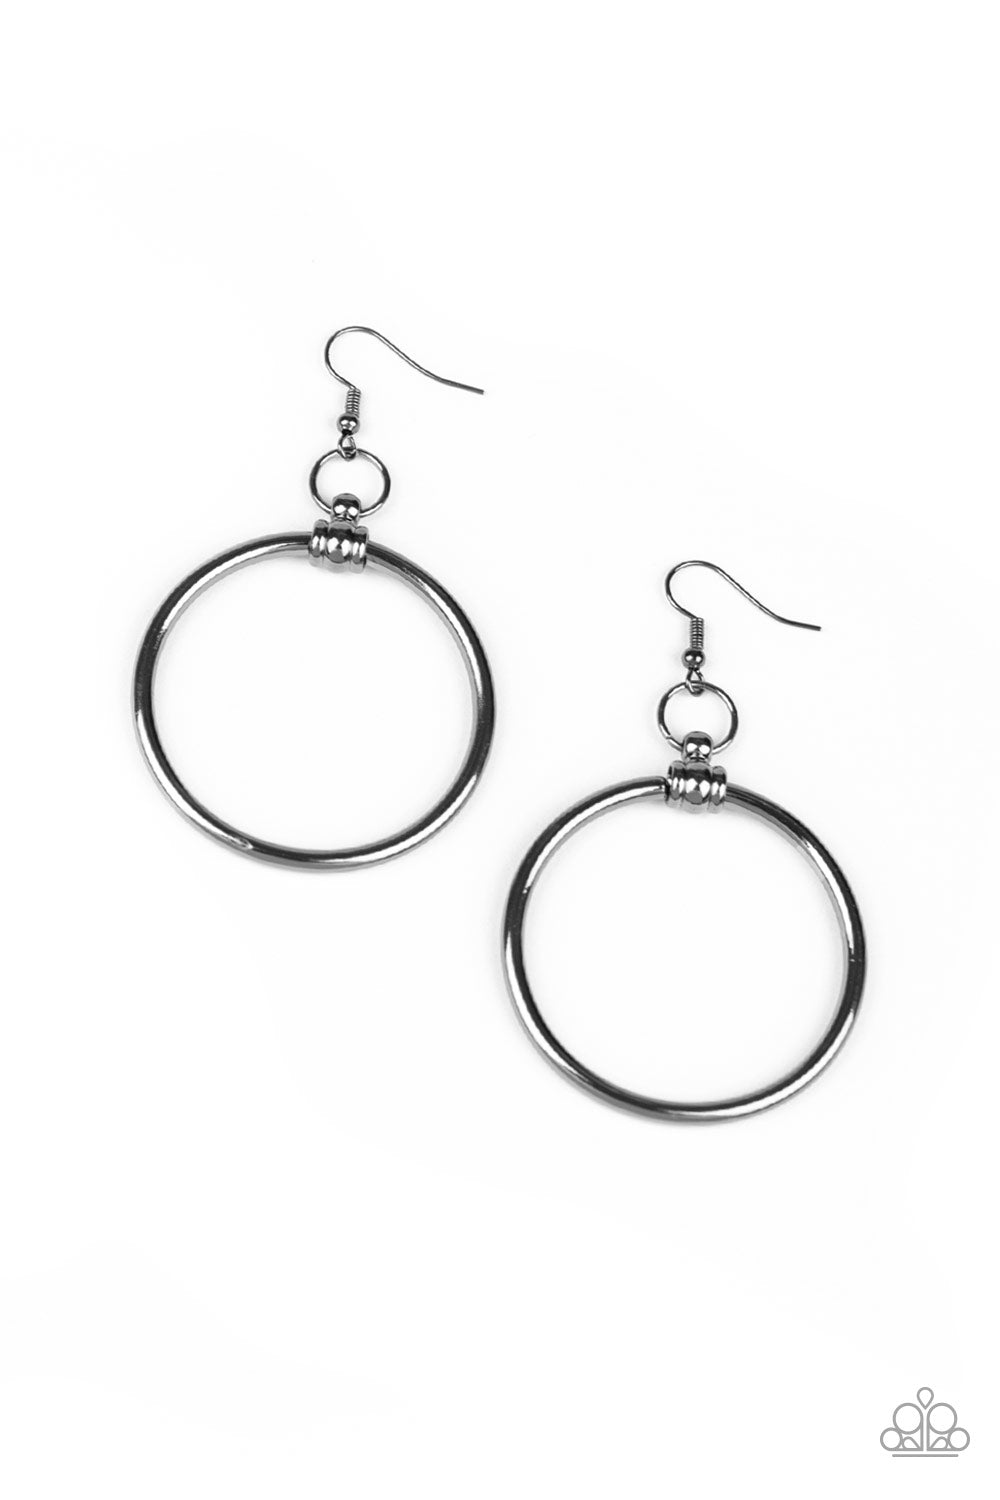 A thick gunmetal ring is threaded through the center of an ornate gunmetal fitting, creating a refined hoop. Earring attaches to a standard fishhook fitting.